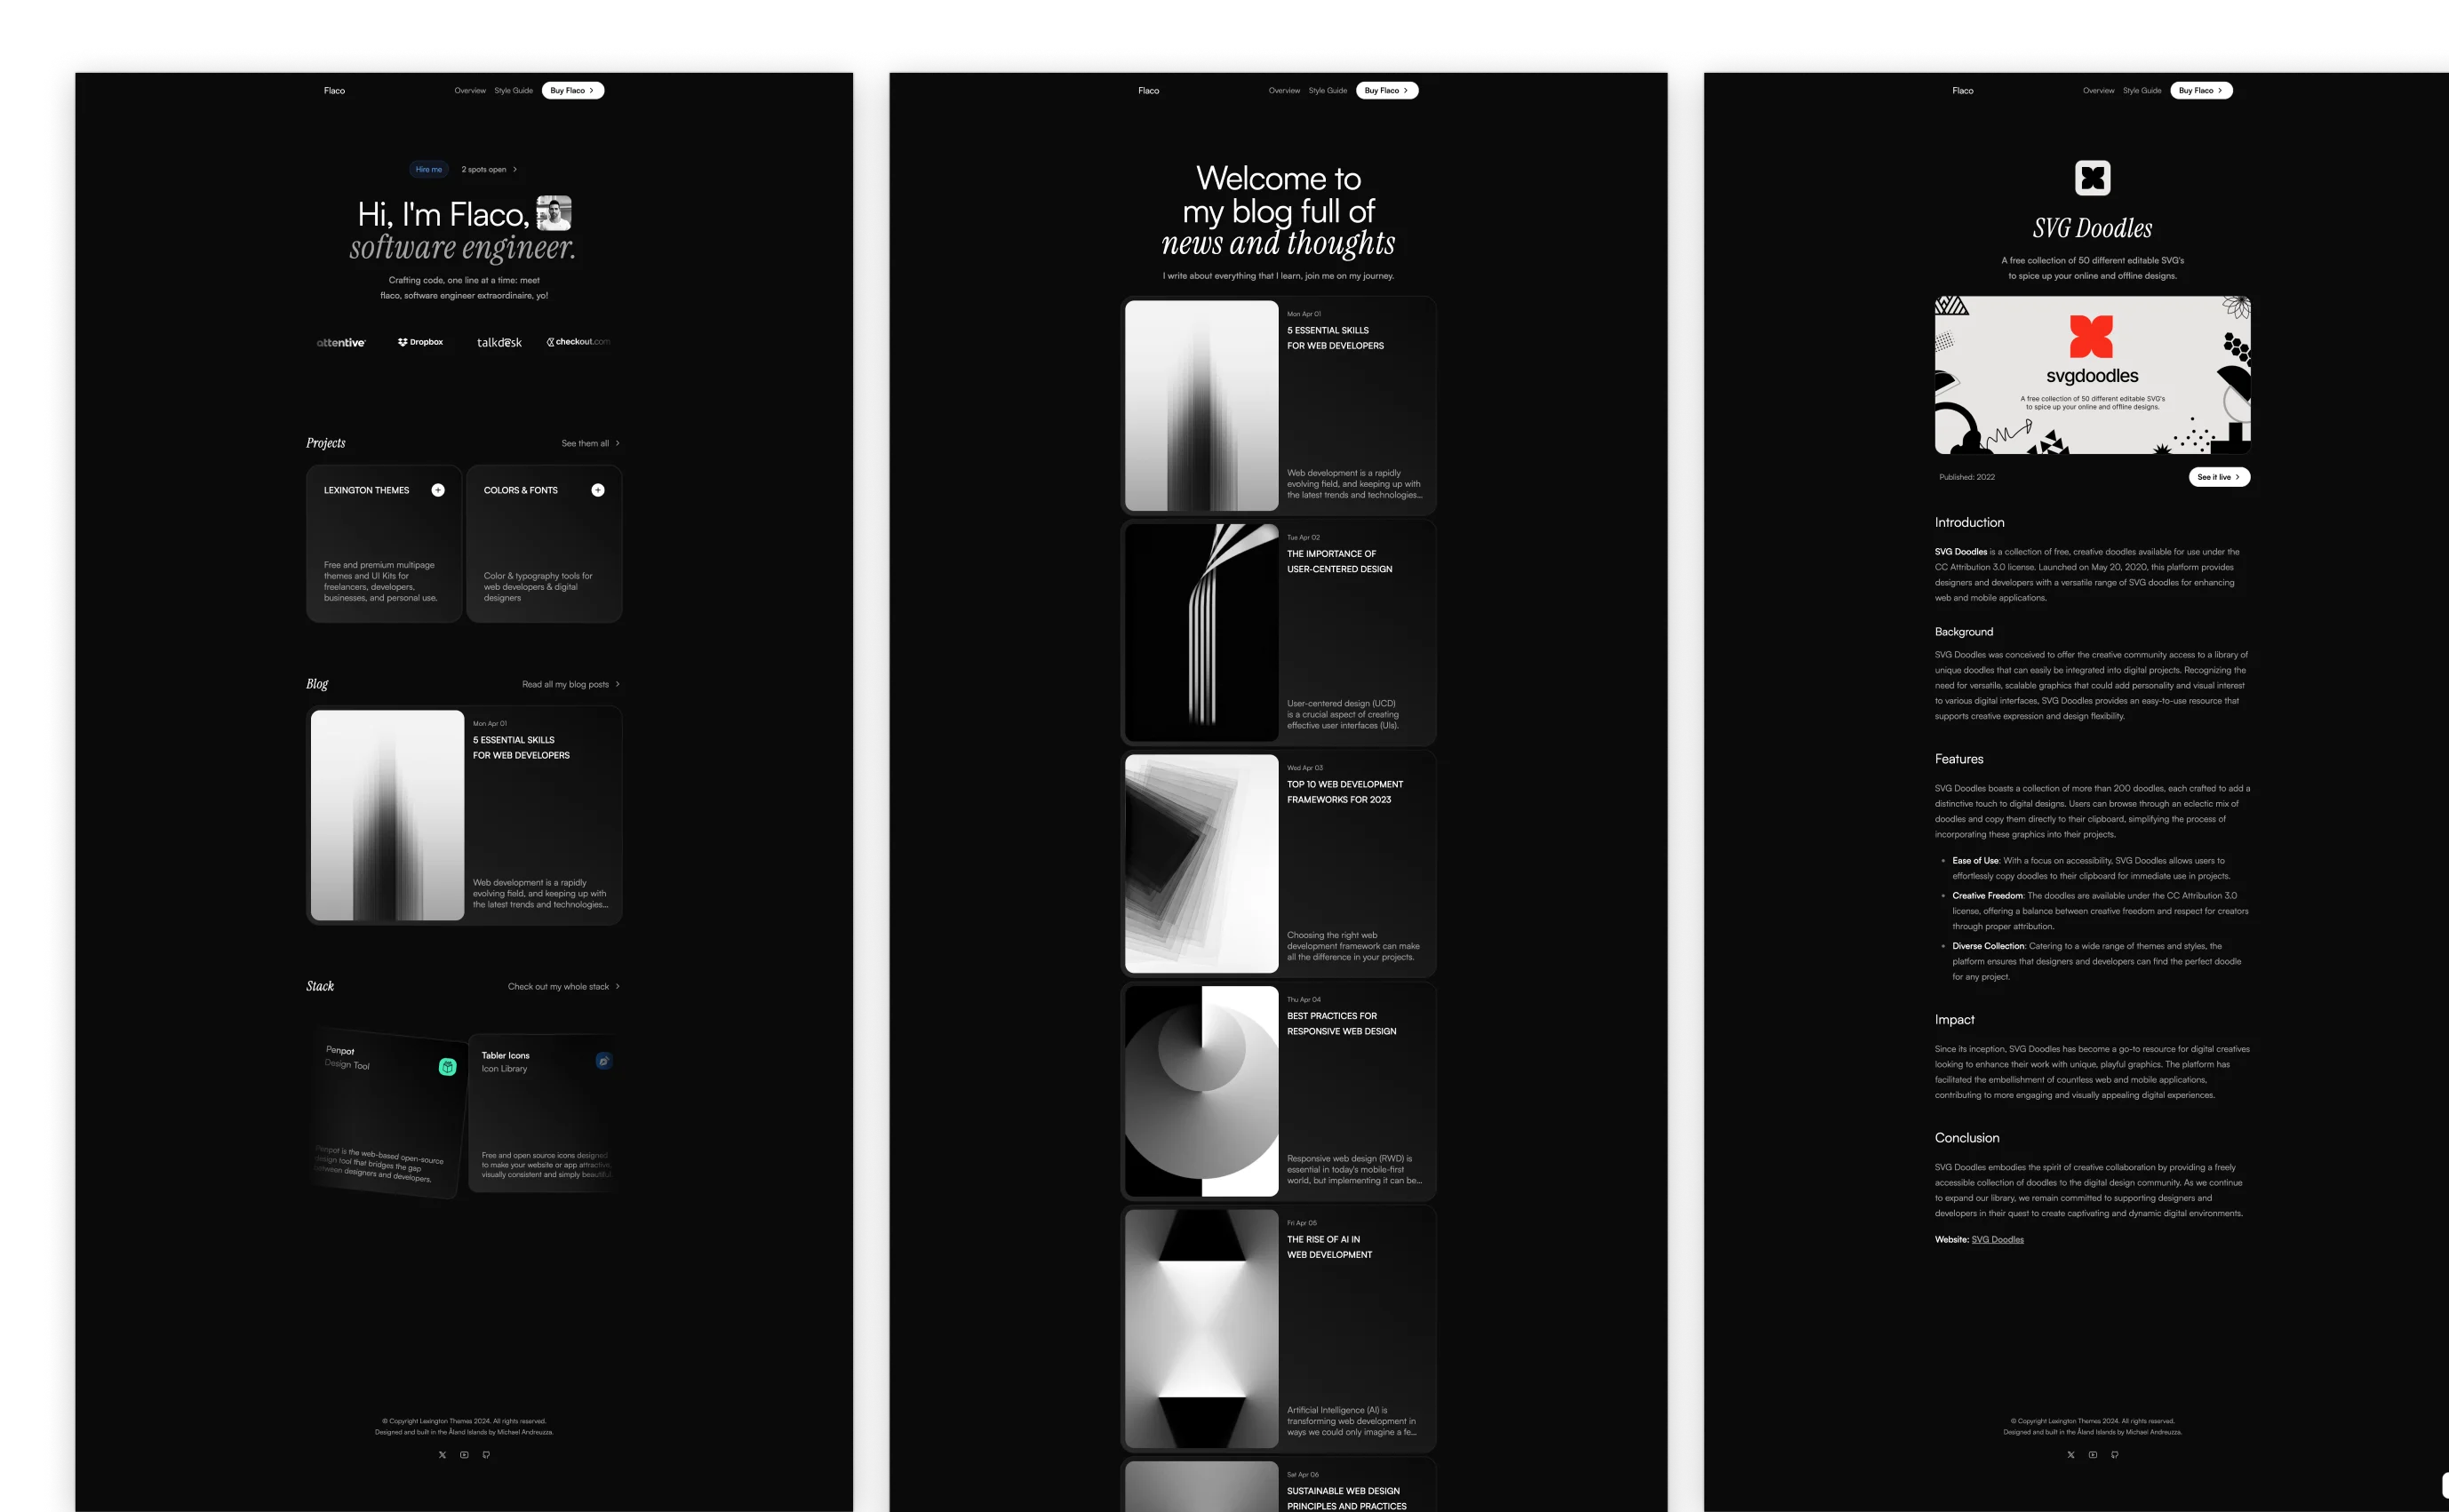 Flaco theme interface showcasing a dark design with text 'Markdown & Flaco is a Portfolio Study Mon,' a laptop on a bed, and various UI elements. Includes a brief intro of the designer from Finland and a call to action to view all projects.